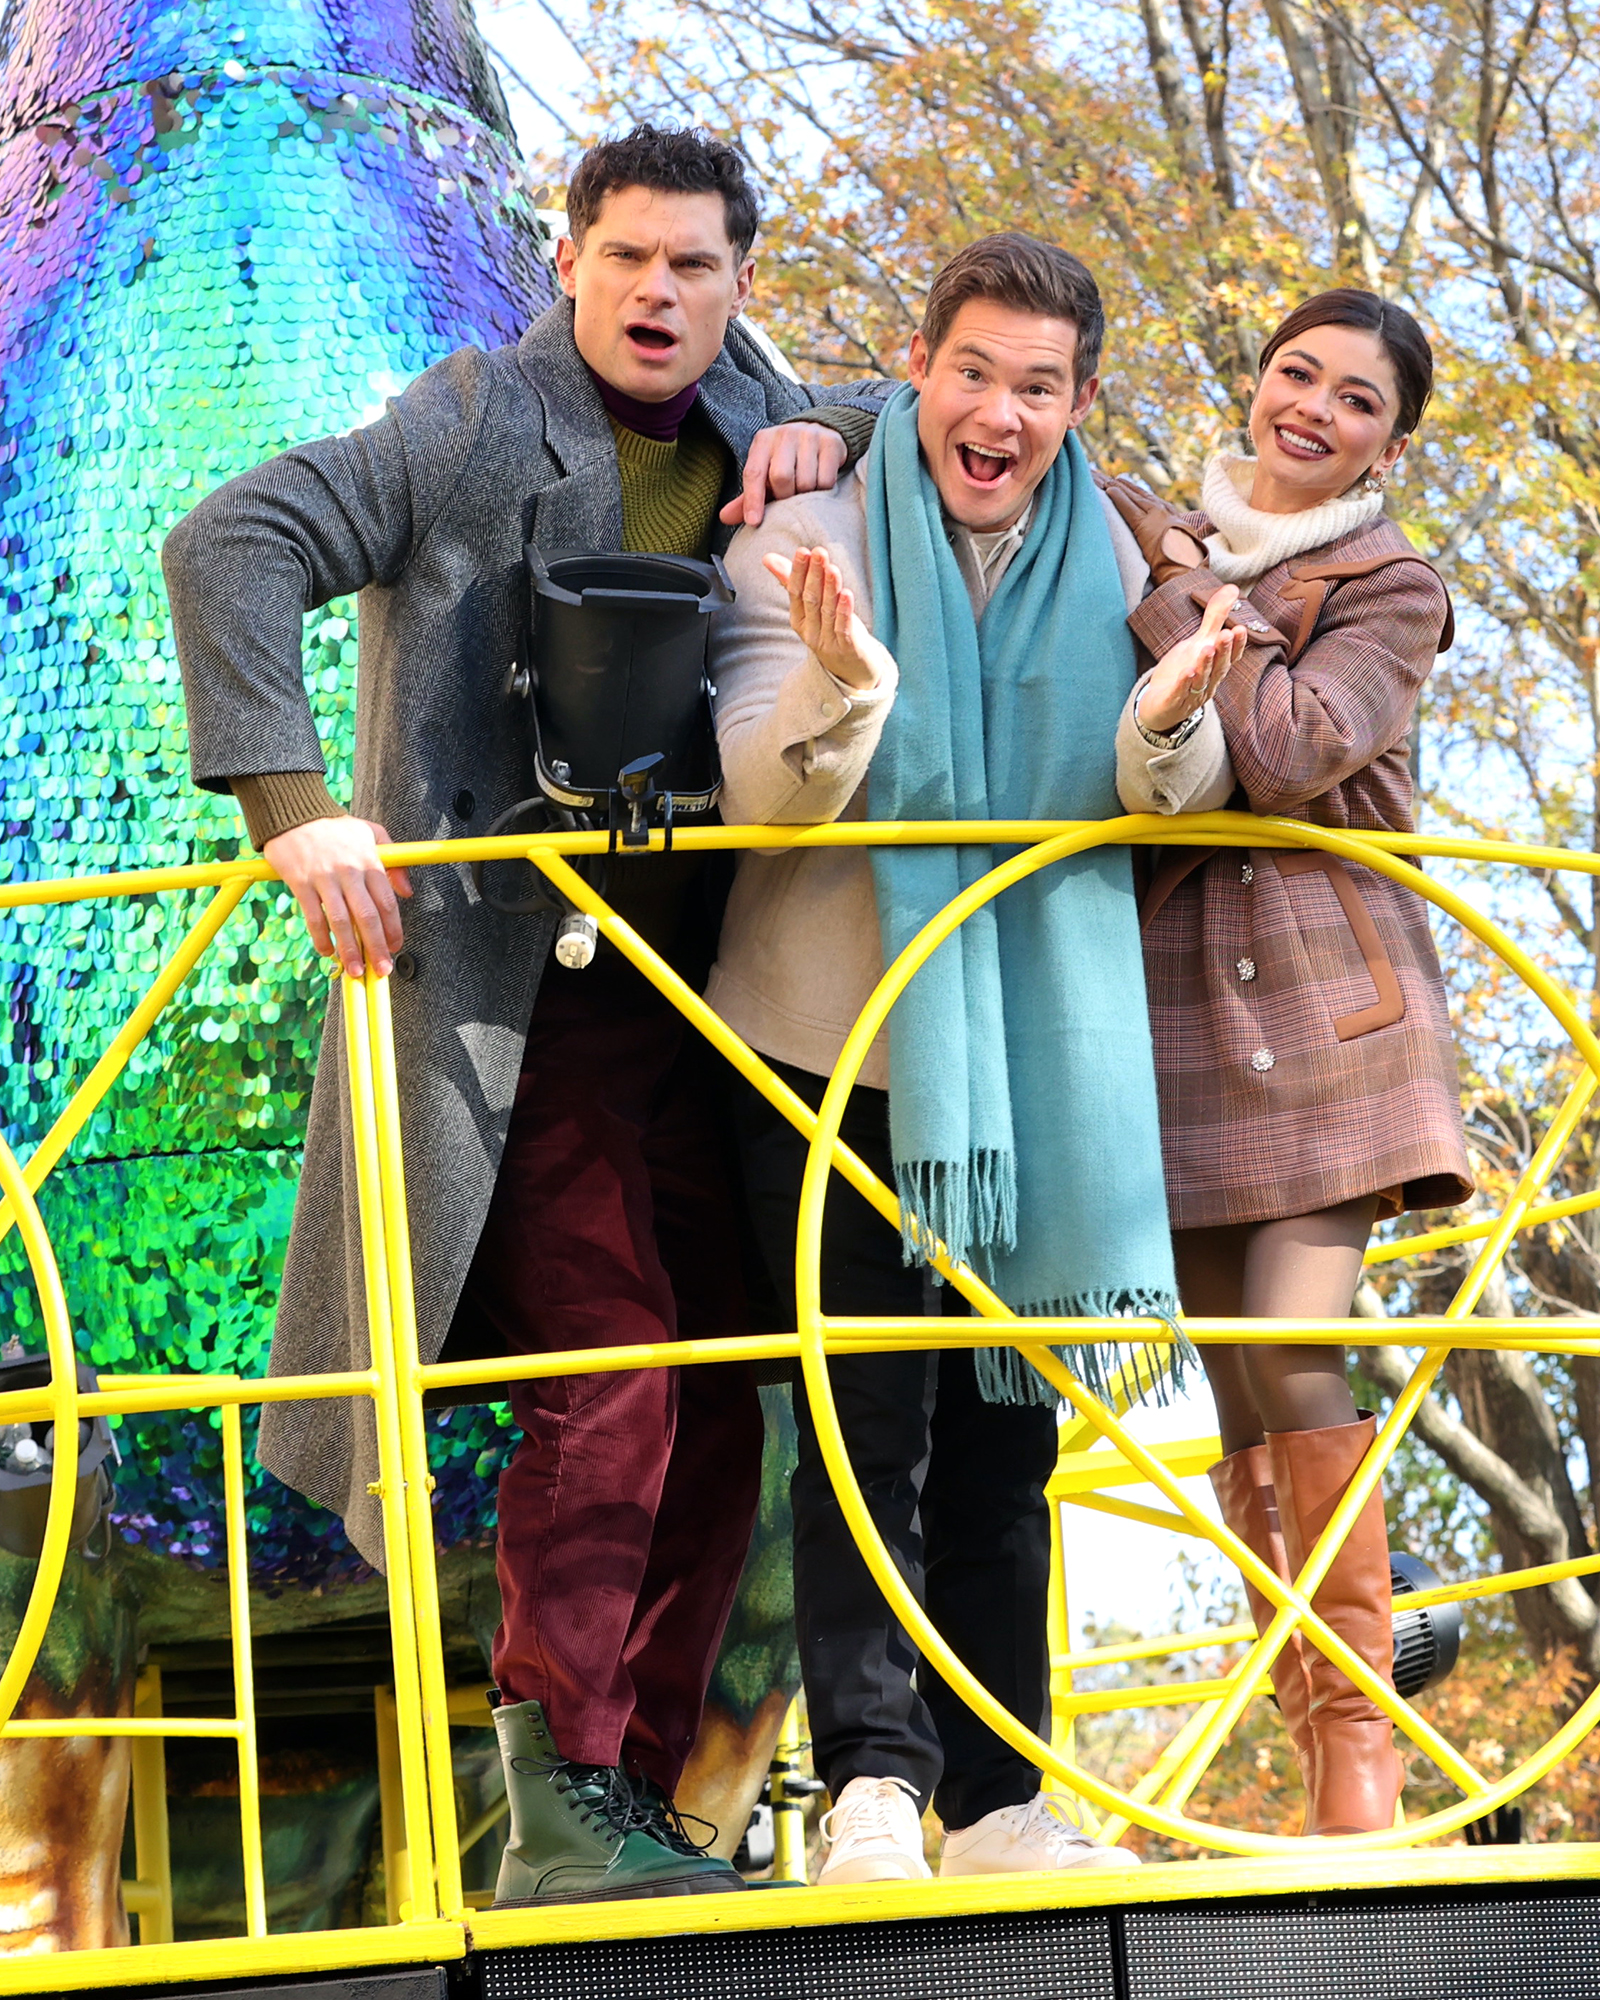 Sarah Hyland, Adam DeVine And Flula Borg At The "Macy's Thanksgiving Day Parade In NYC